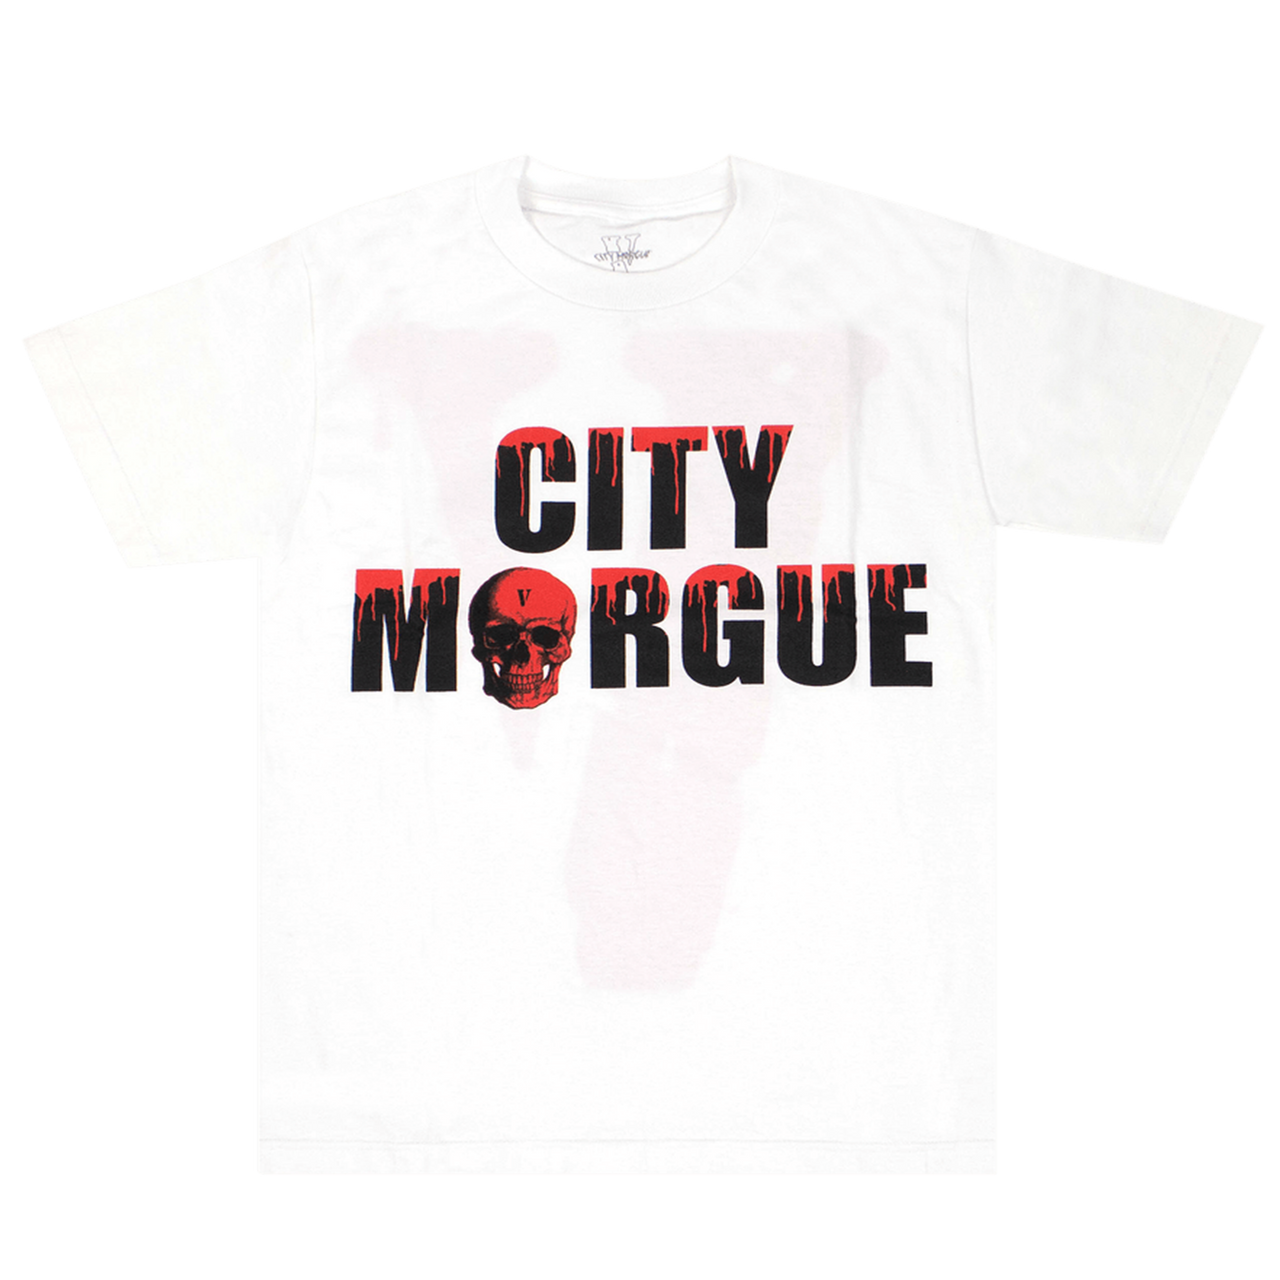 Vlone x City Morgue Dogs Tee White